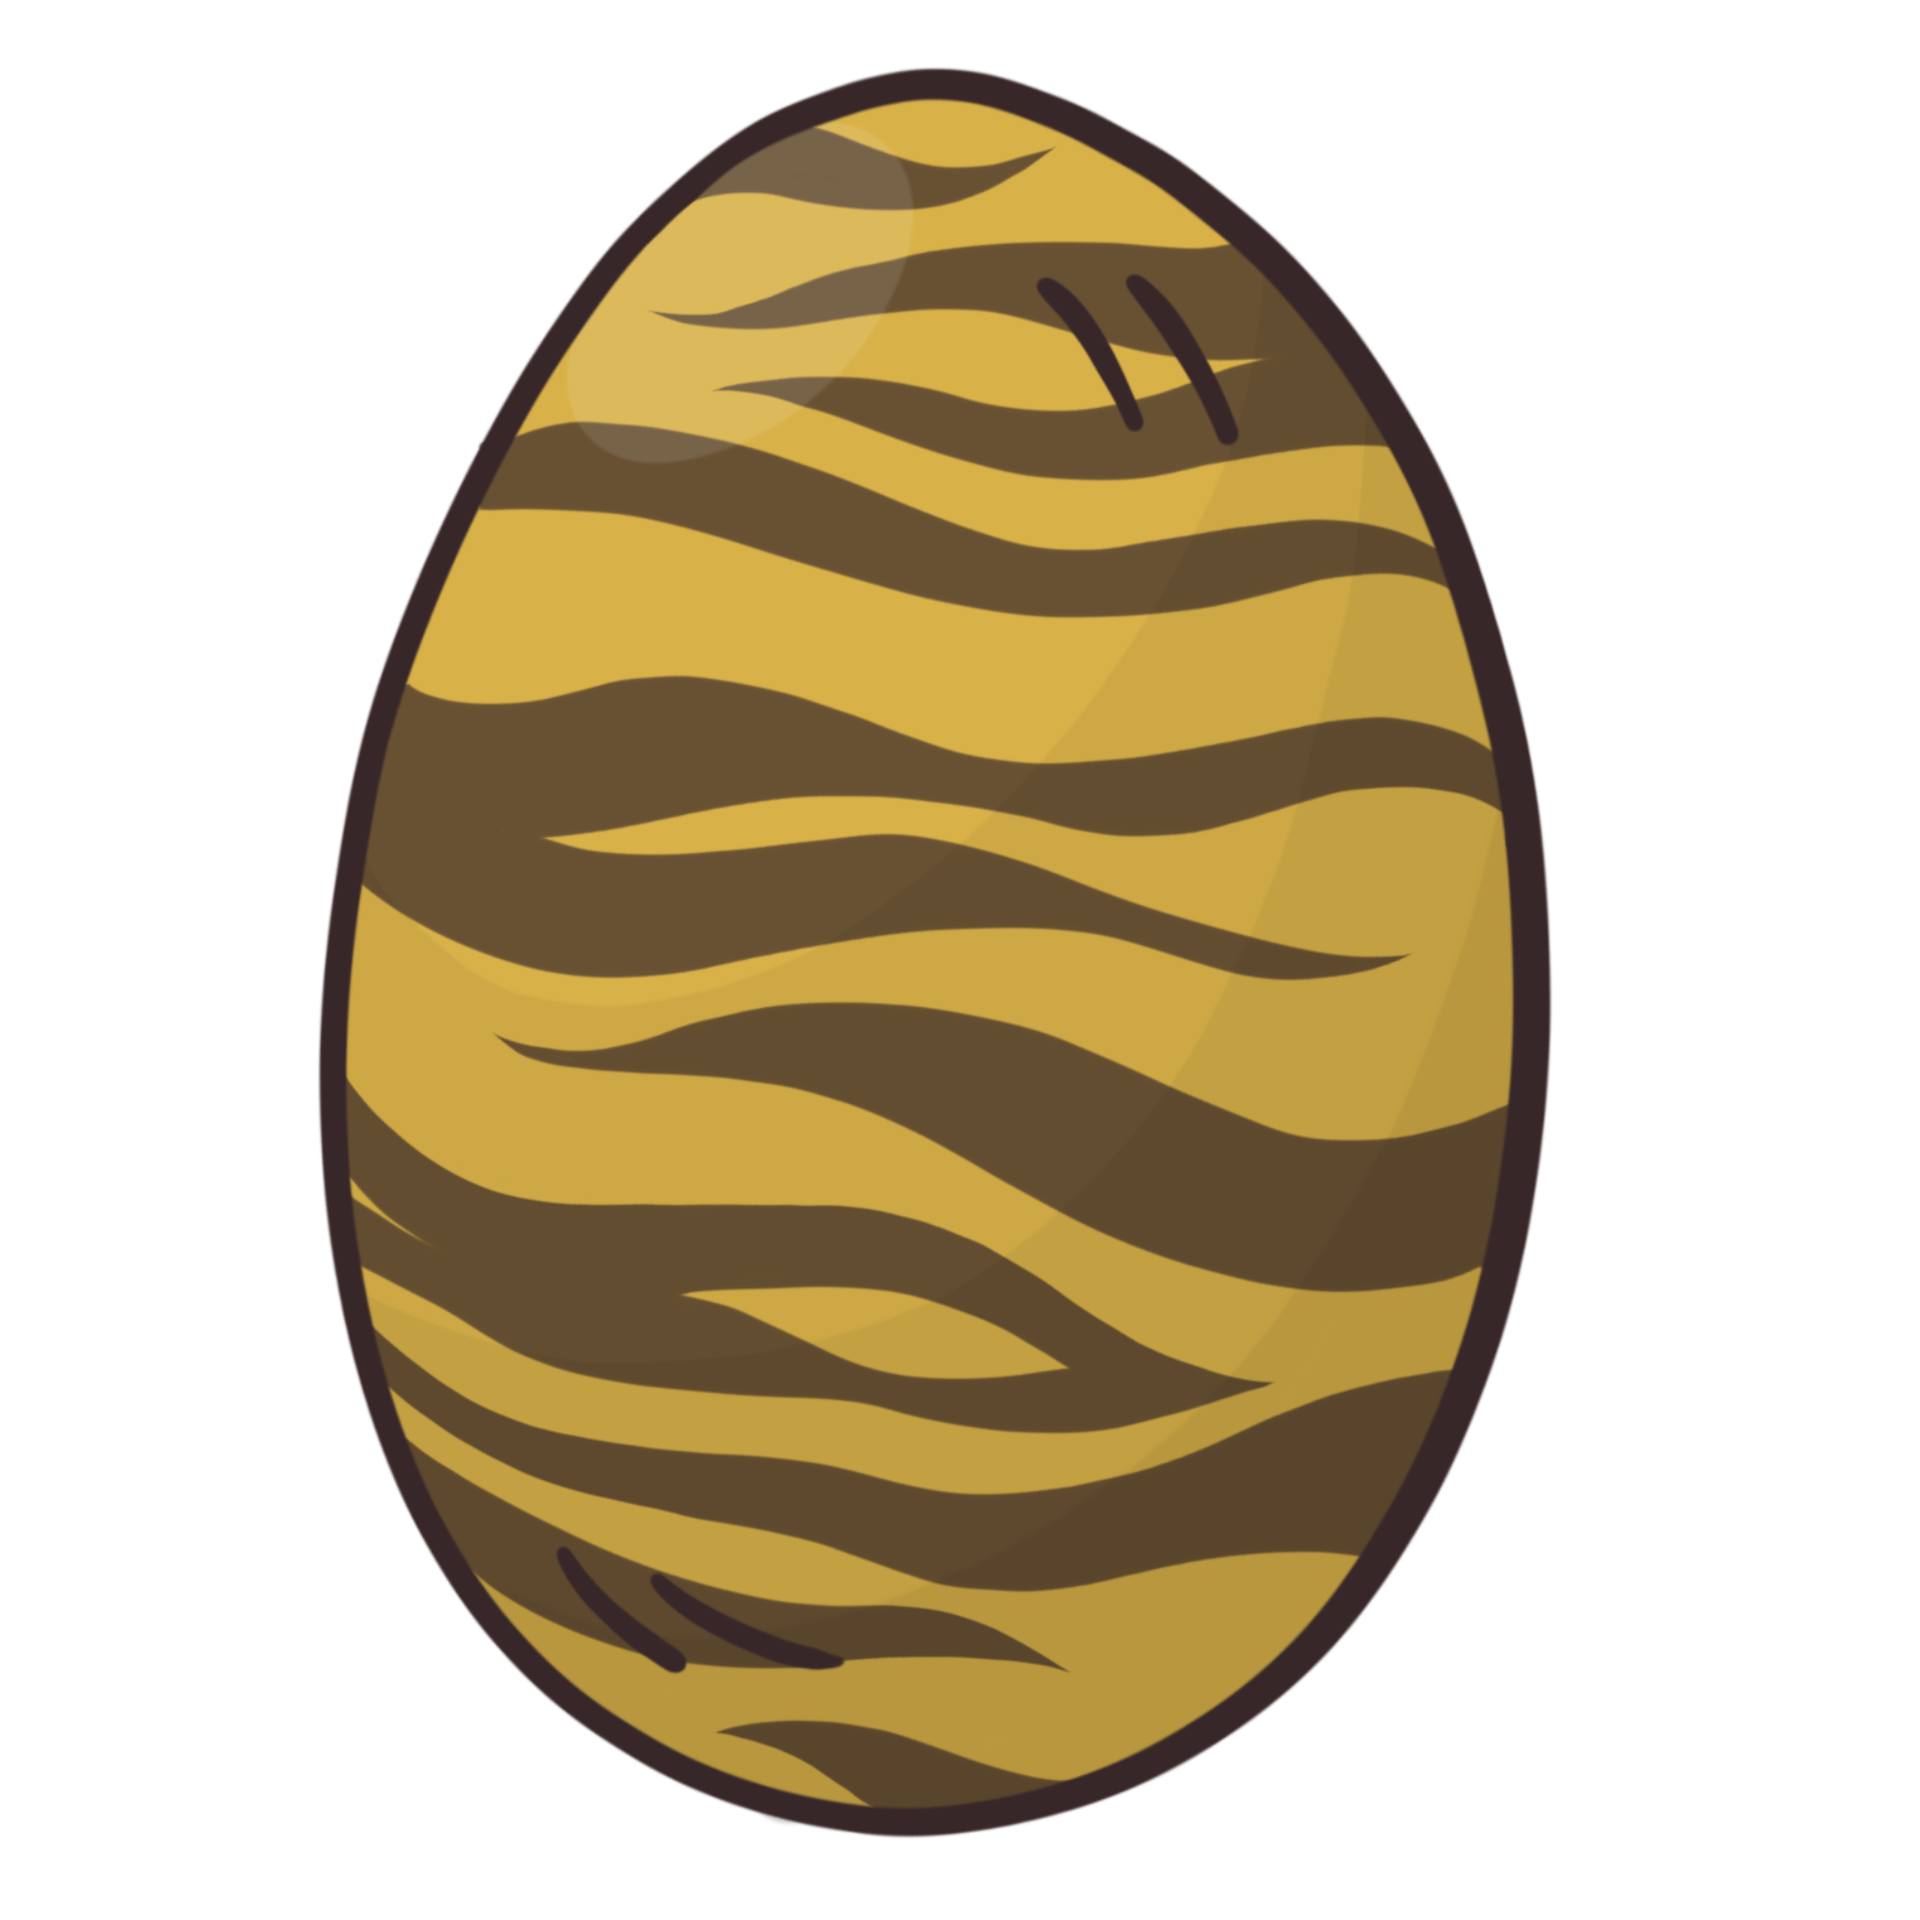 Easter eggs cartoon style. Easter eggs Paschal eggs image as cartoon  colorful style for the Christian feast of Easter, which celebrates the  resurrection of Jesus 16398100 PNG